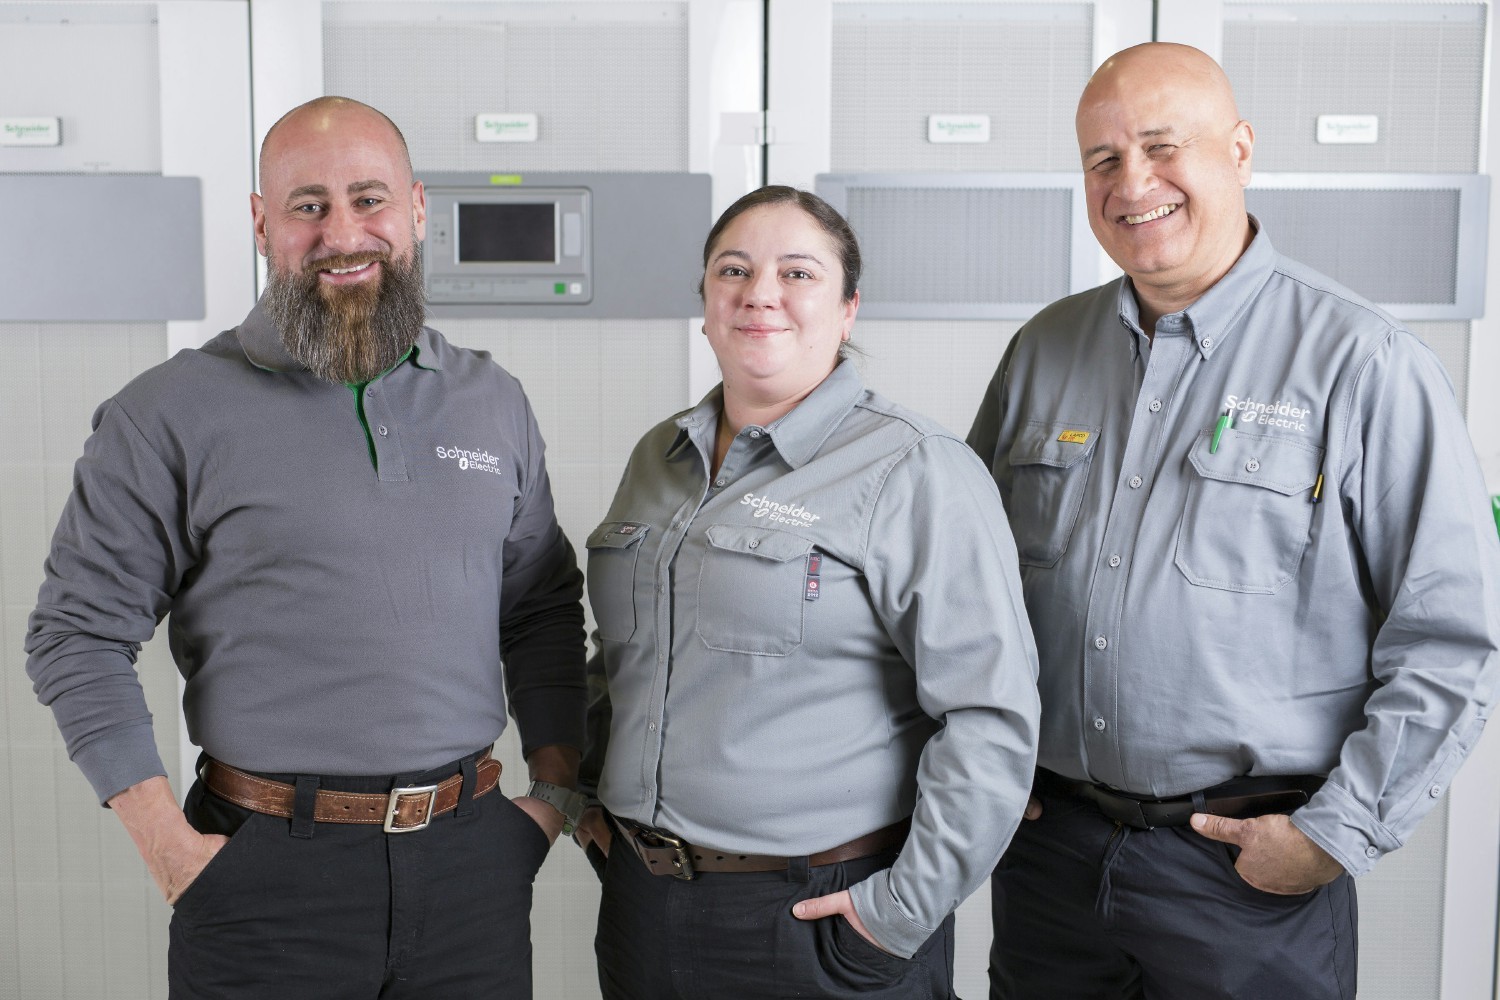 Our Schneider Electric services team members provide their expertise for equipment management & sustainability.